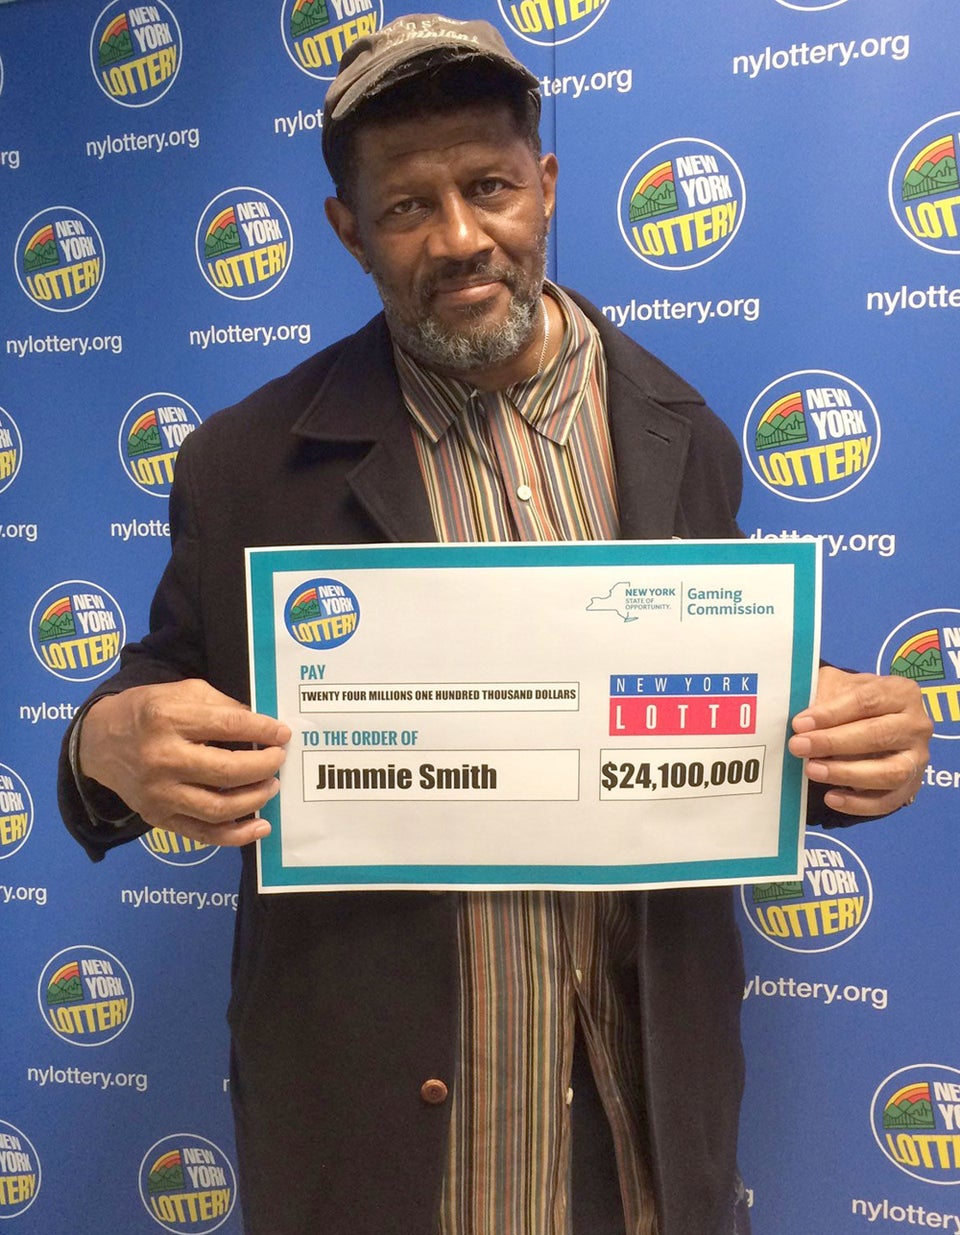 New Jersey Grandfather Wins $24 Million After Finding Year Old Lottery Ticket in His Shirt Pocket